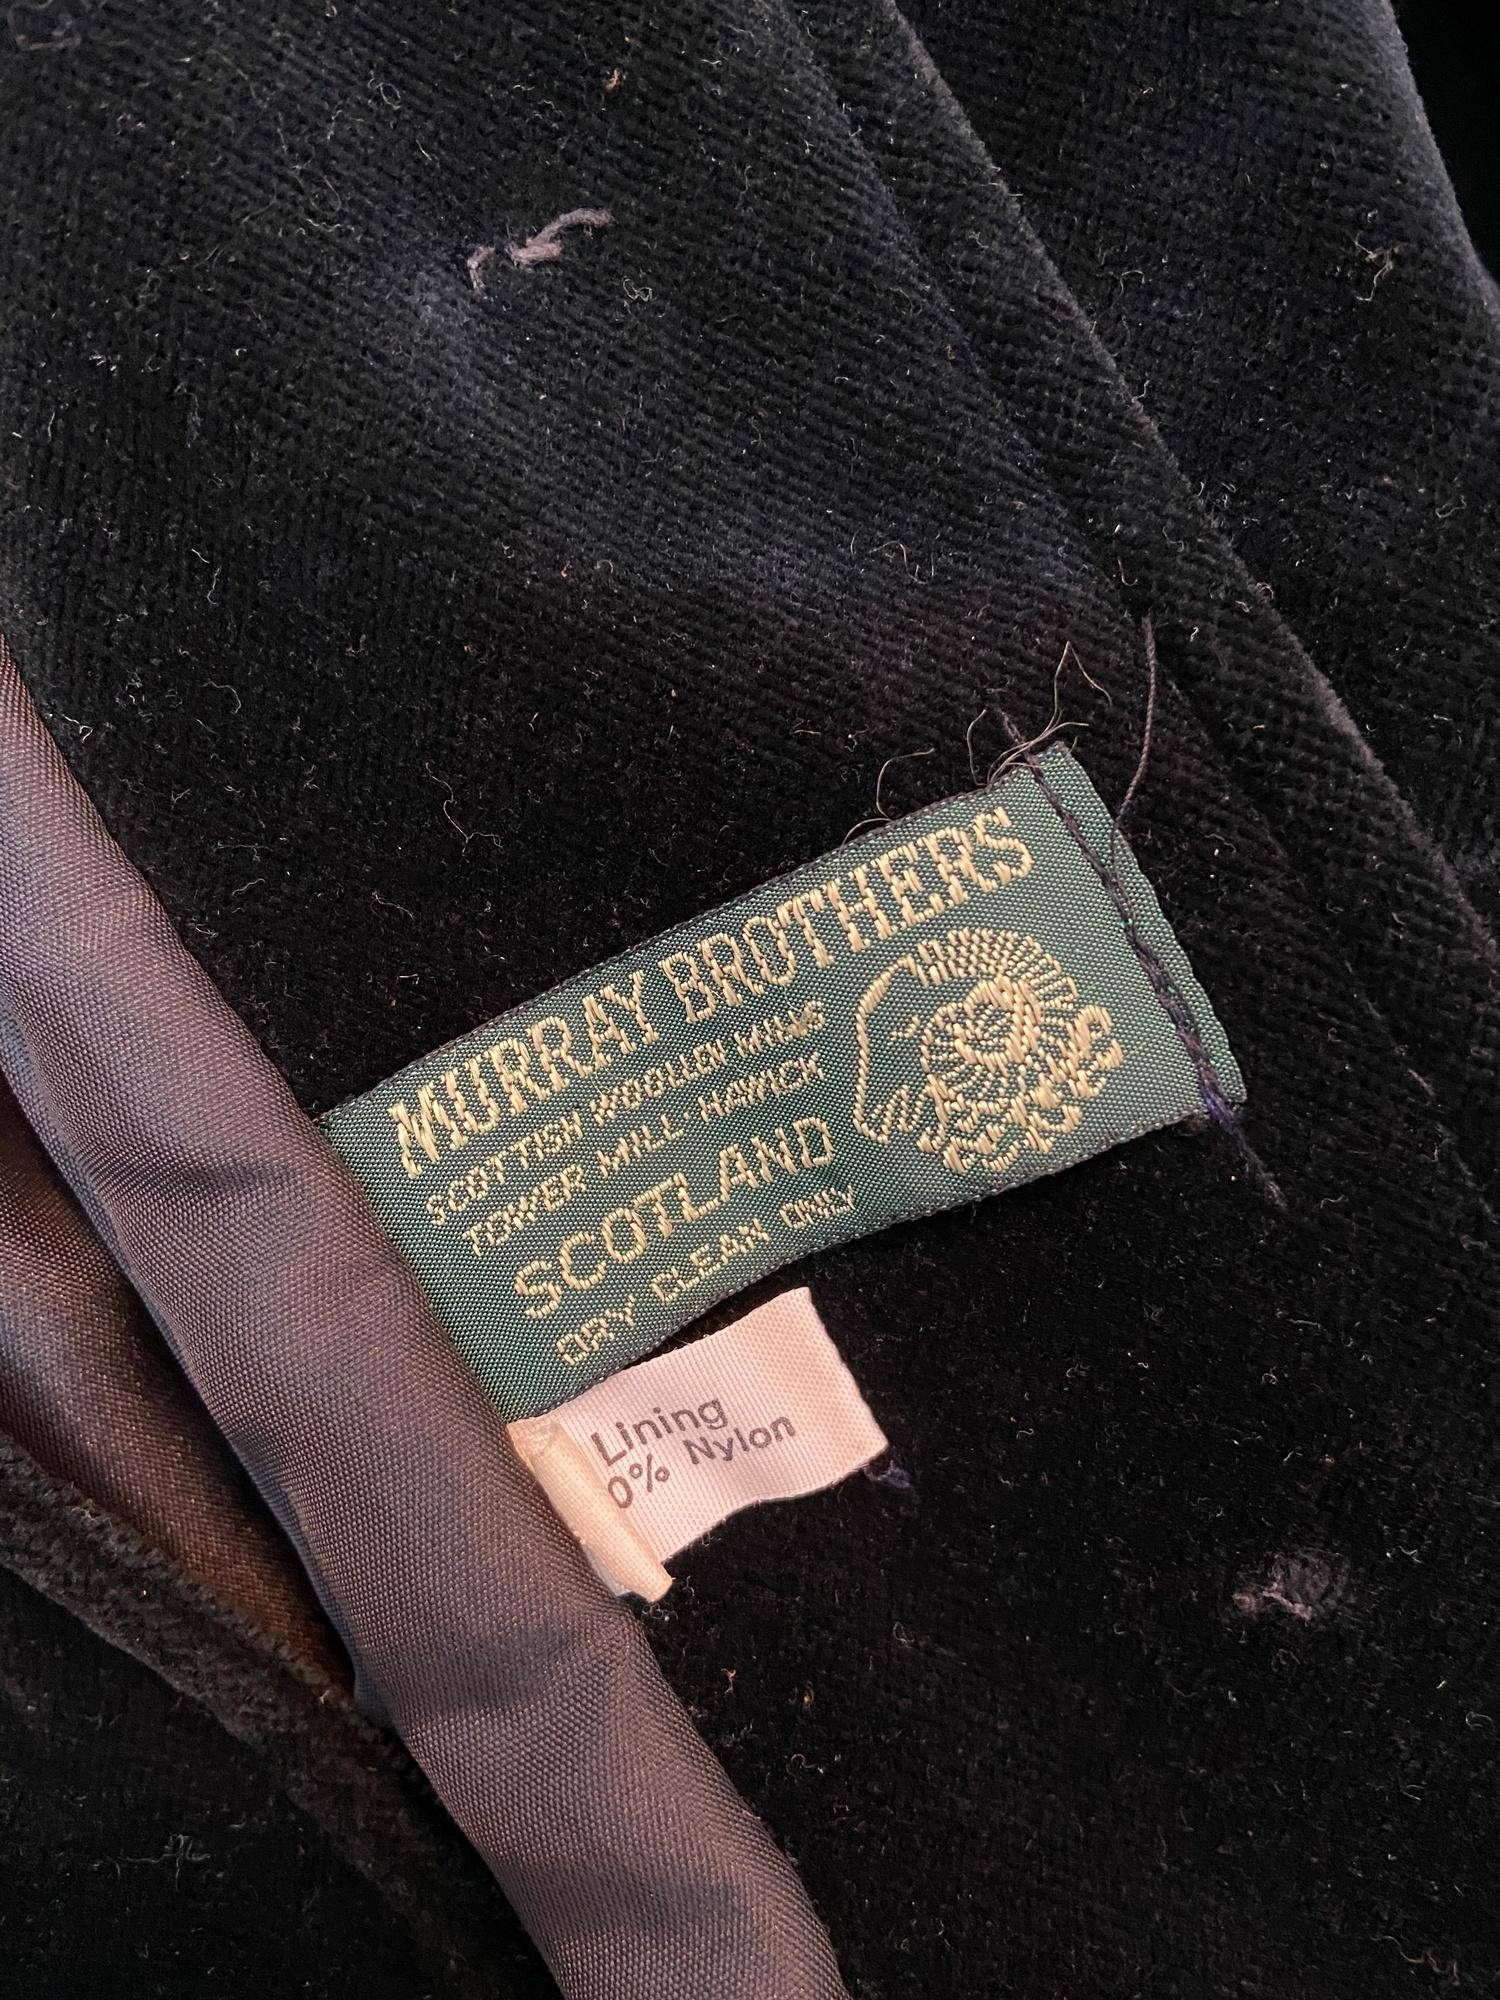 A Military Telegraphist Air Gunners Association coat, Military photo and vintage Murray Brothers - Image 6 of 6